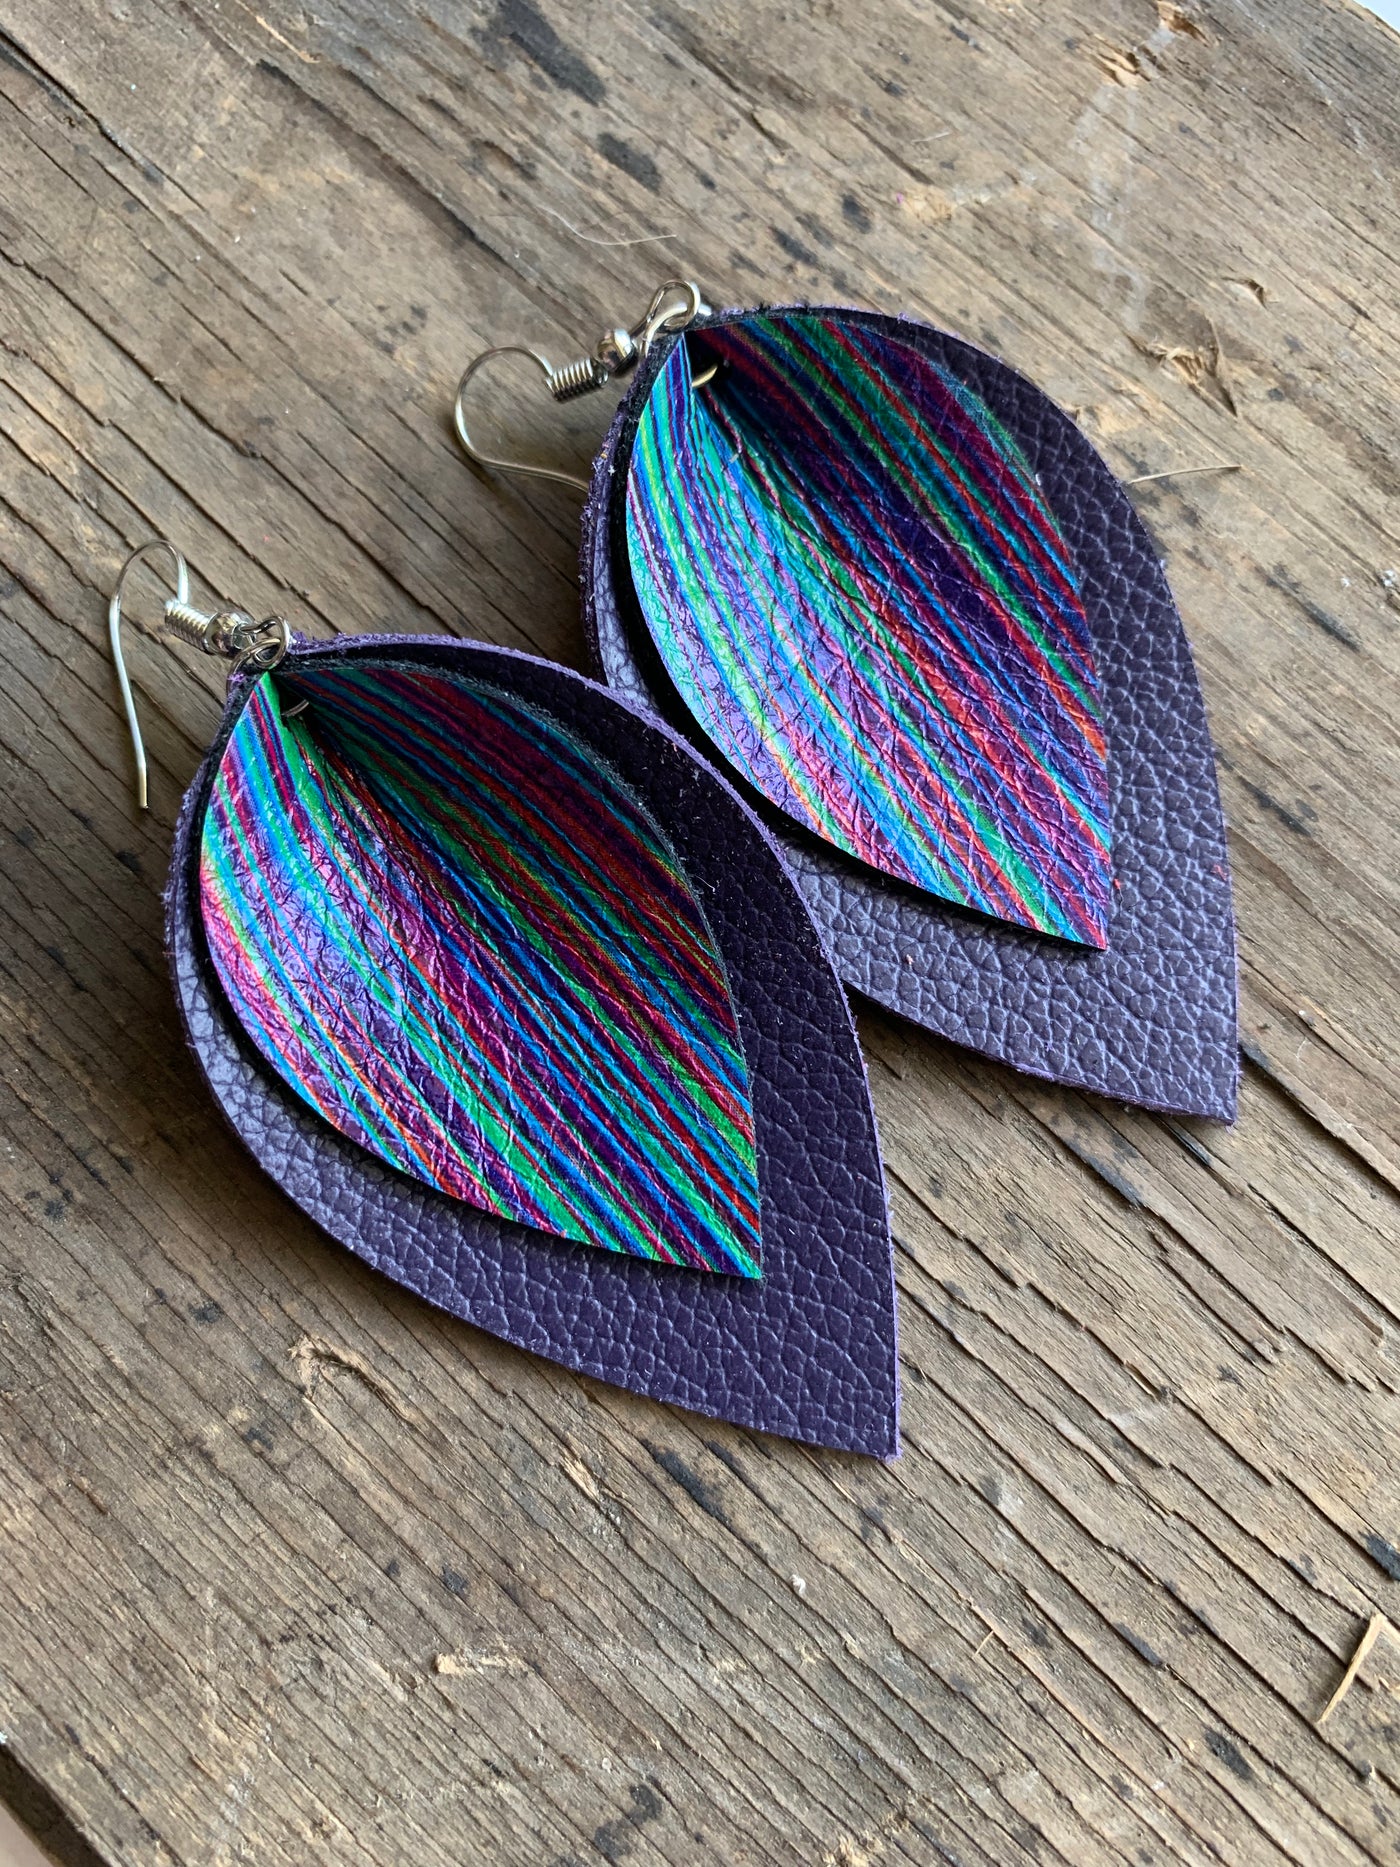 Purple and Rainbow Leather Earrings - Jill's Jewels | Unique, Handcrafted, Trendy, And Fun Jewelry